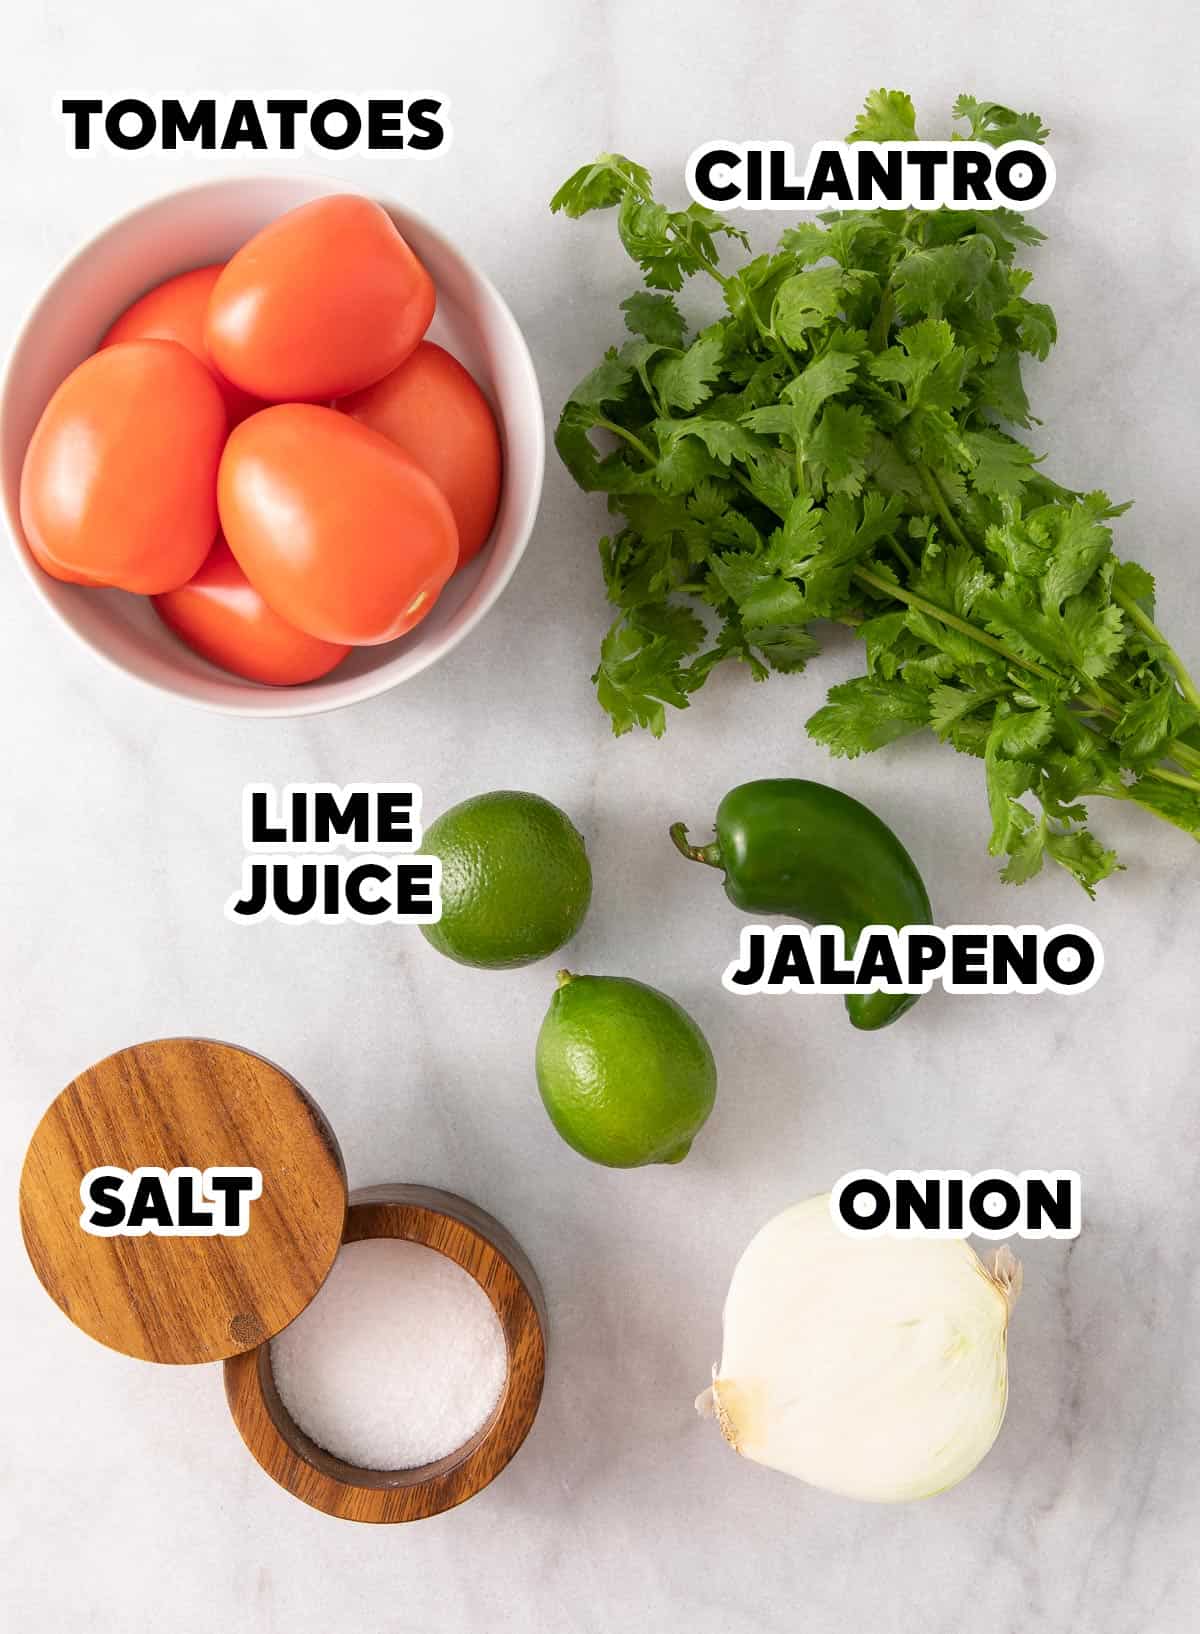 Overhead view of ingredients for Pico de Gallo on a marble surface with overlay text.